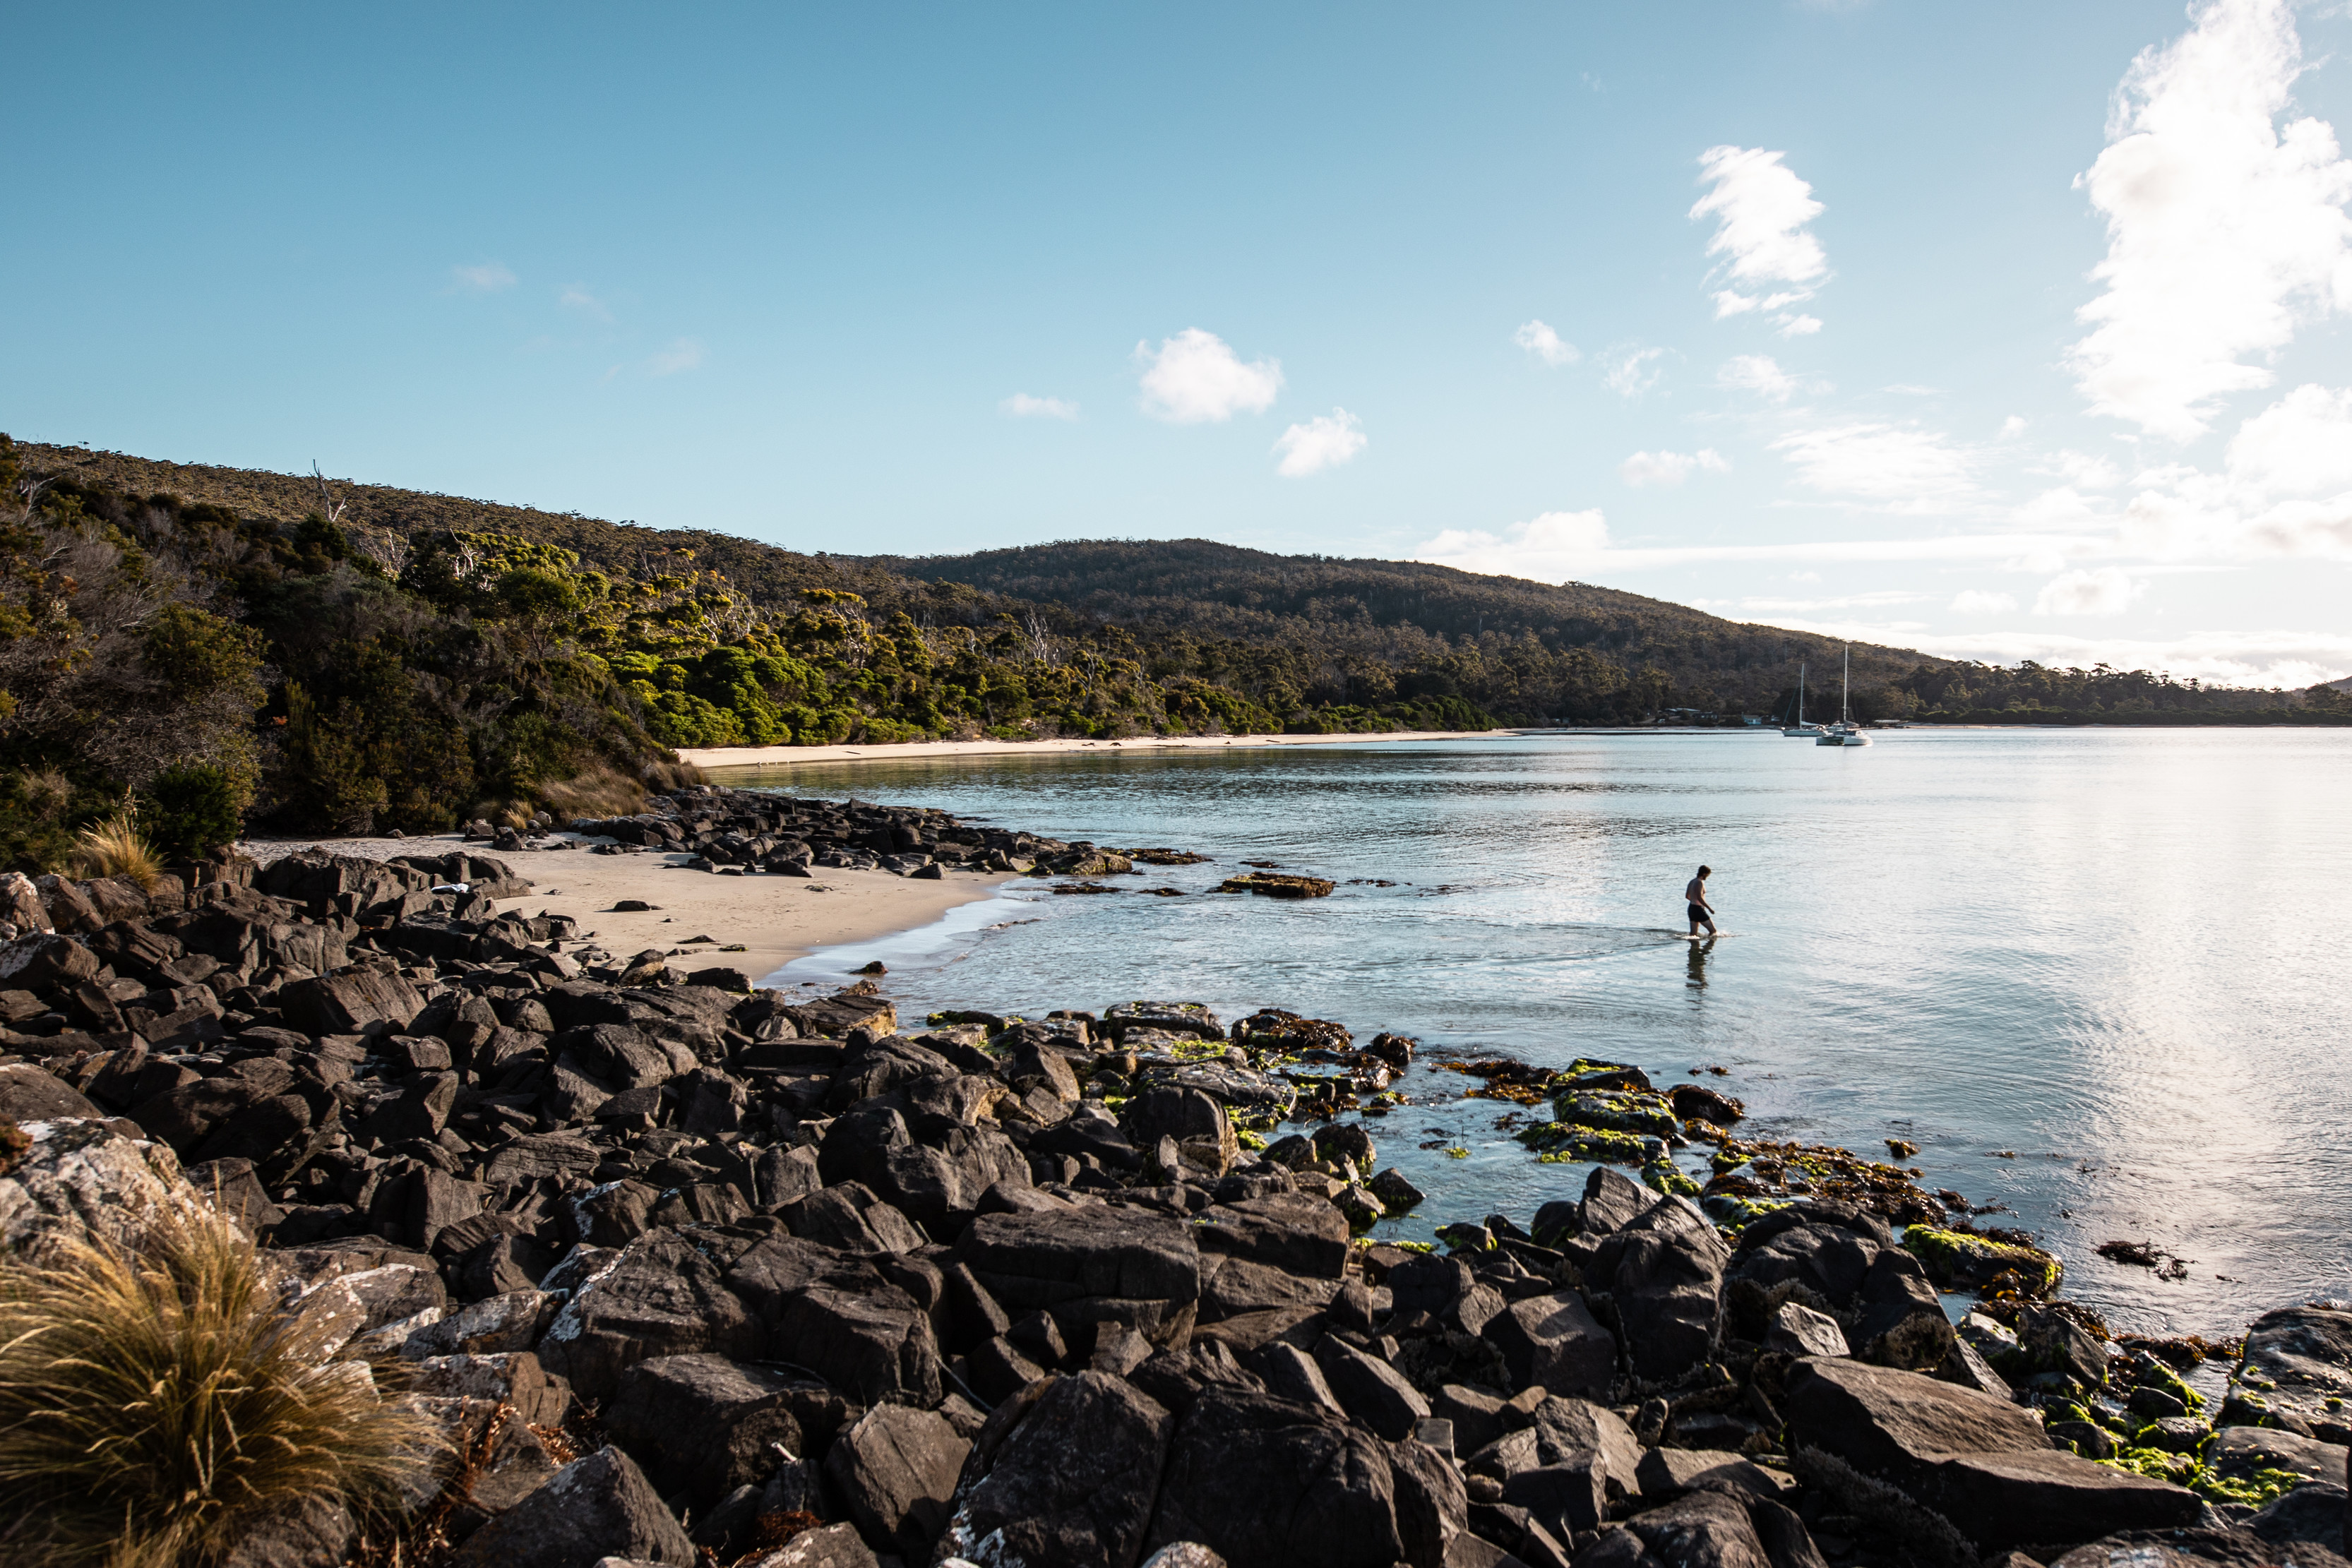 A man walks in the shallow water at Cockle Creek, the green landscape is in the background and rocks in the foreground.